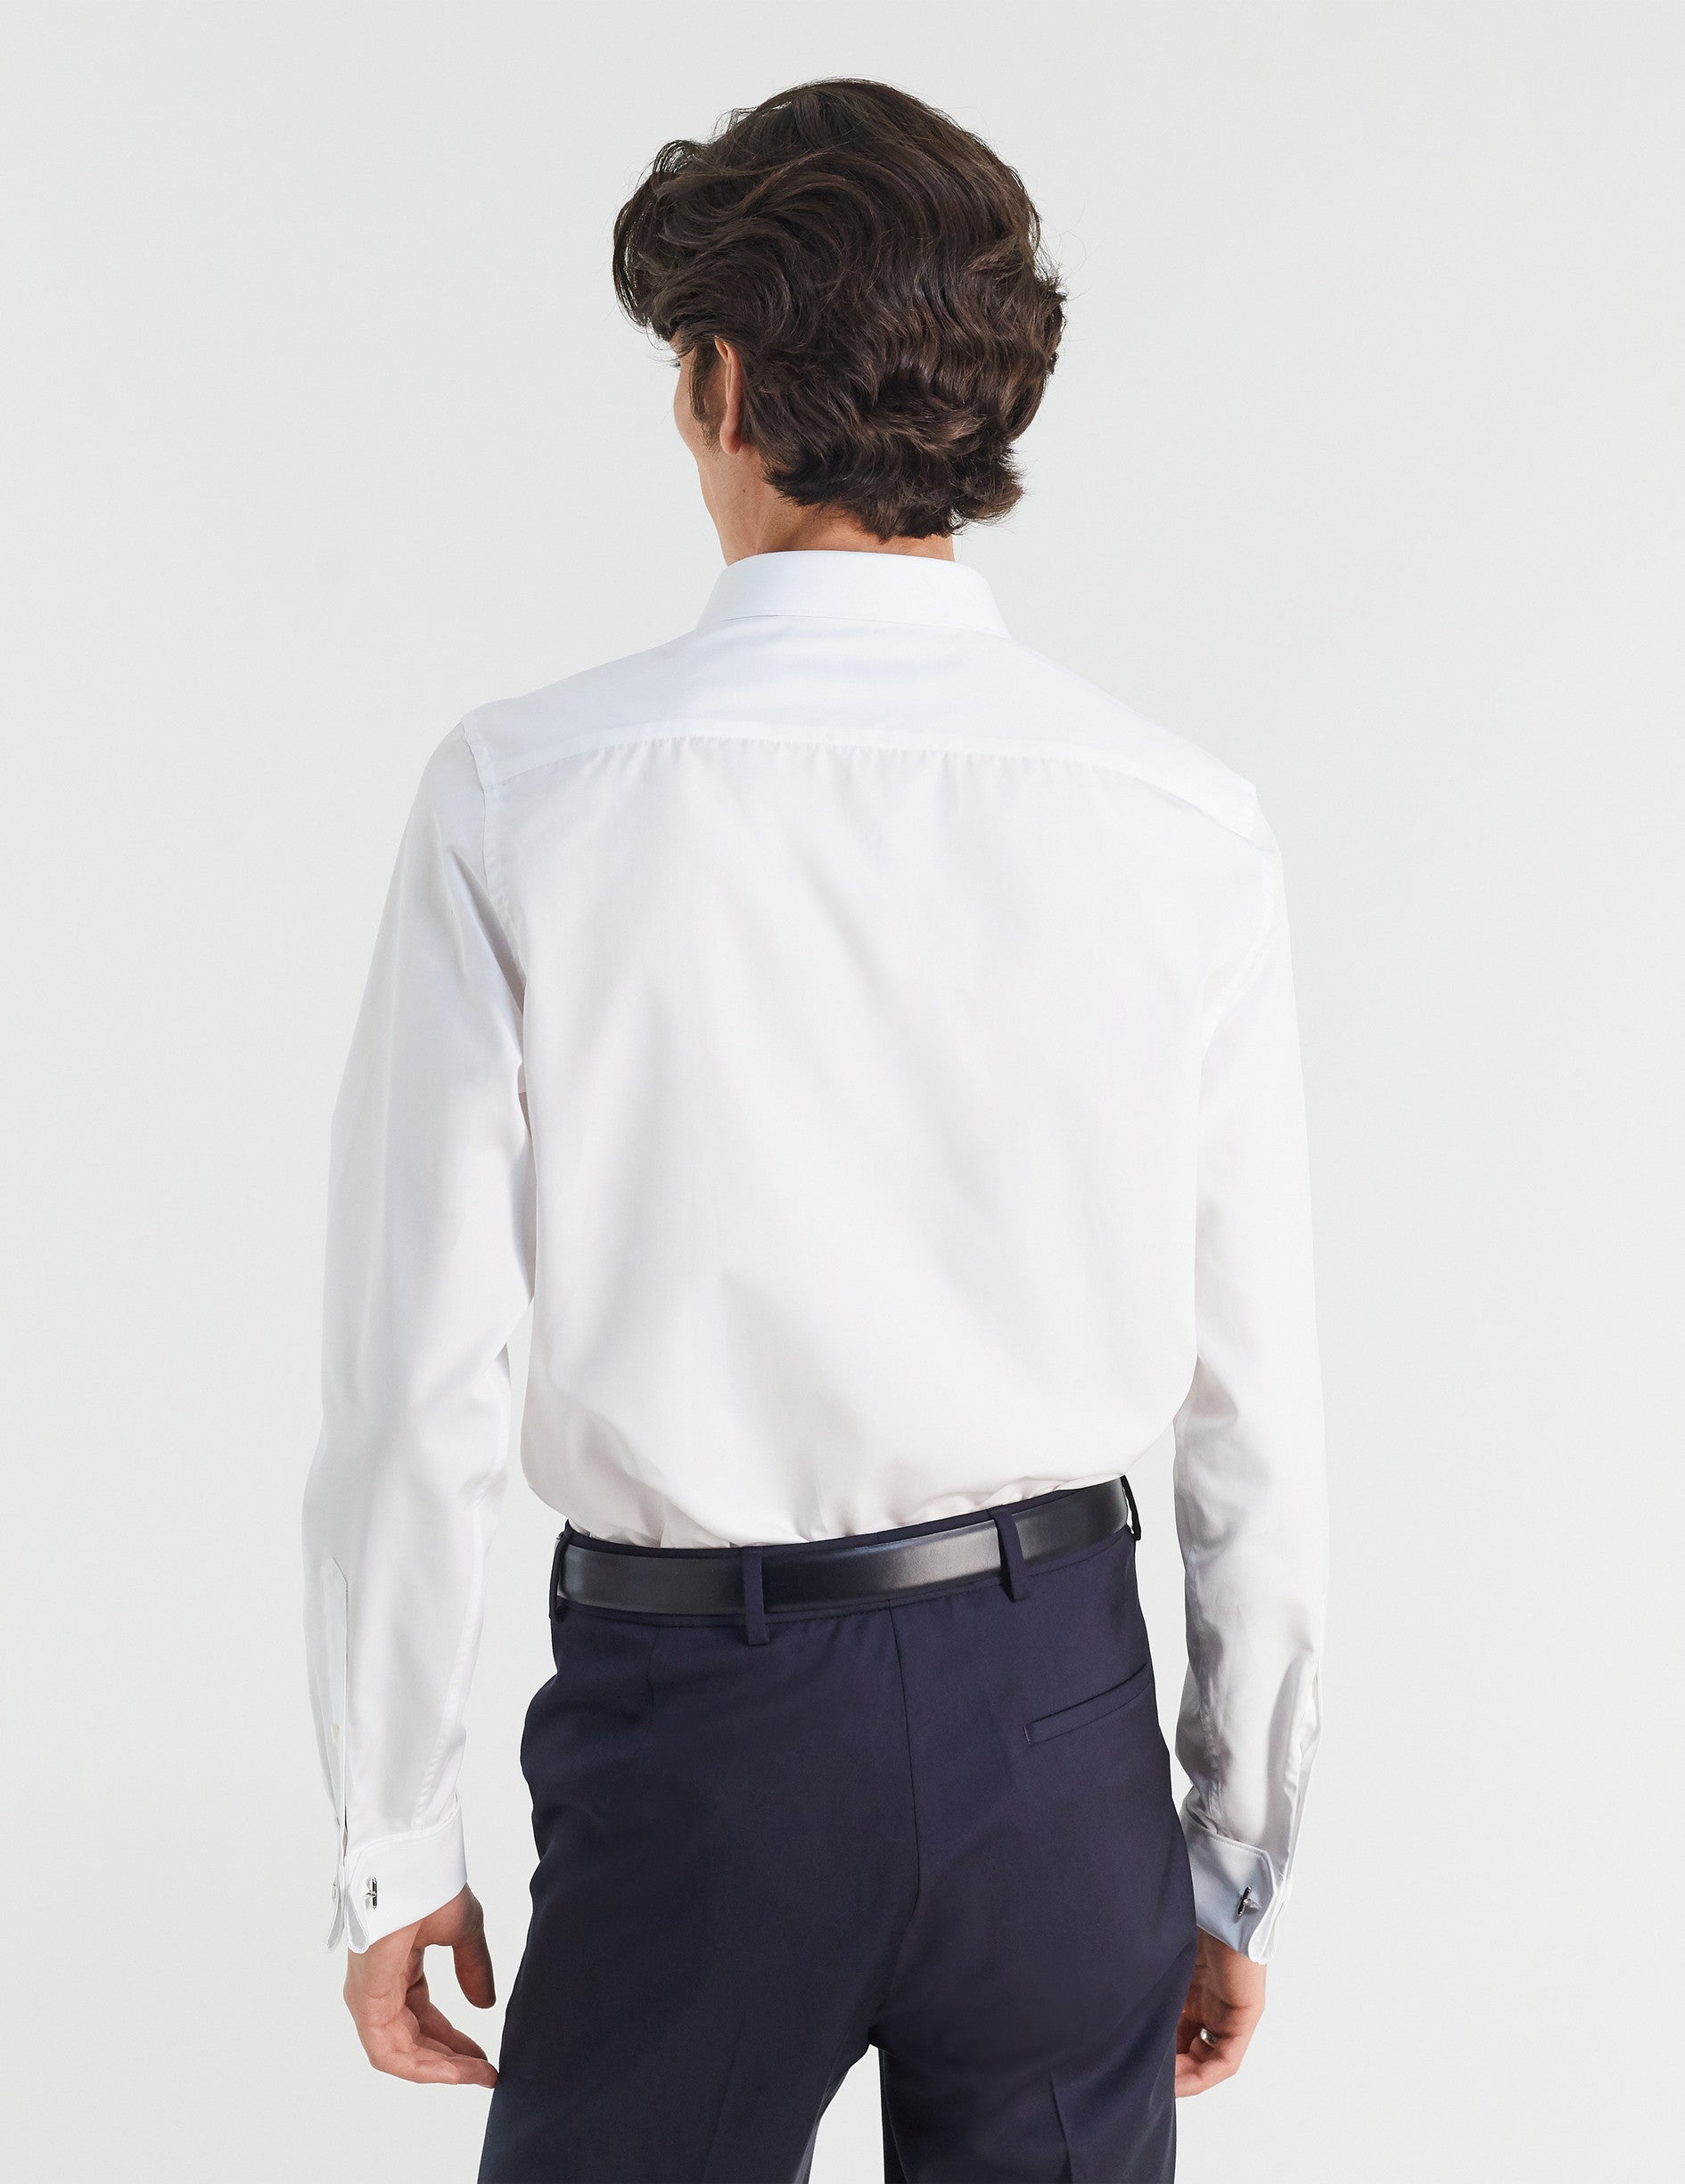 Semi-fitted white shirt - Poplin - Figaret Collar - Musketeers Cuffs